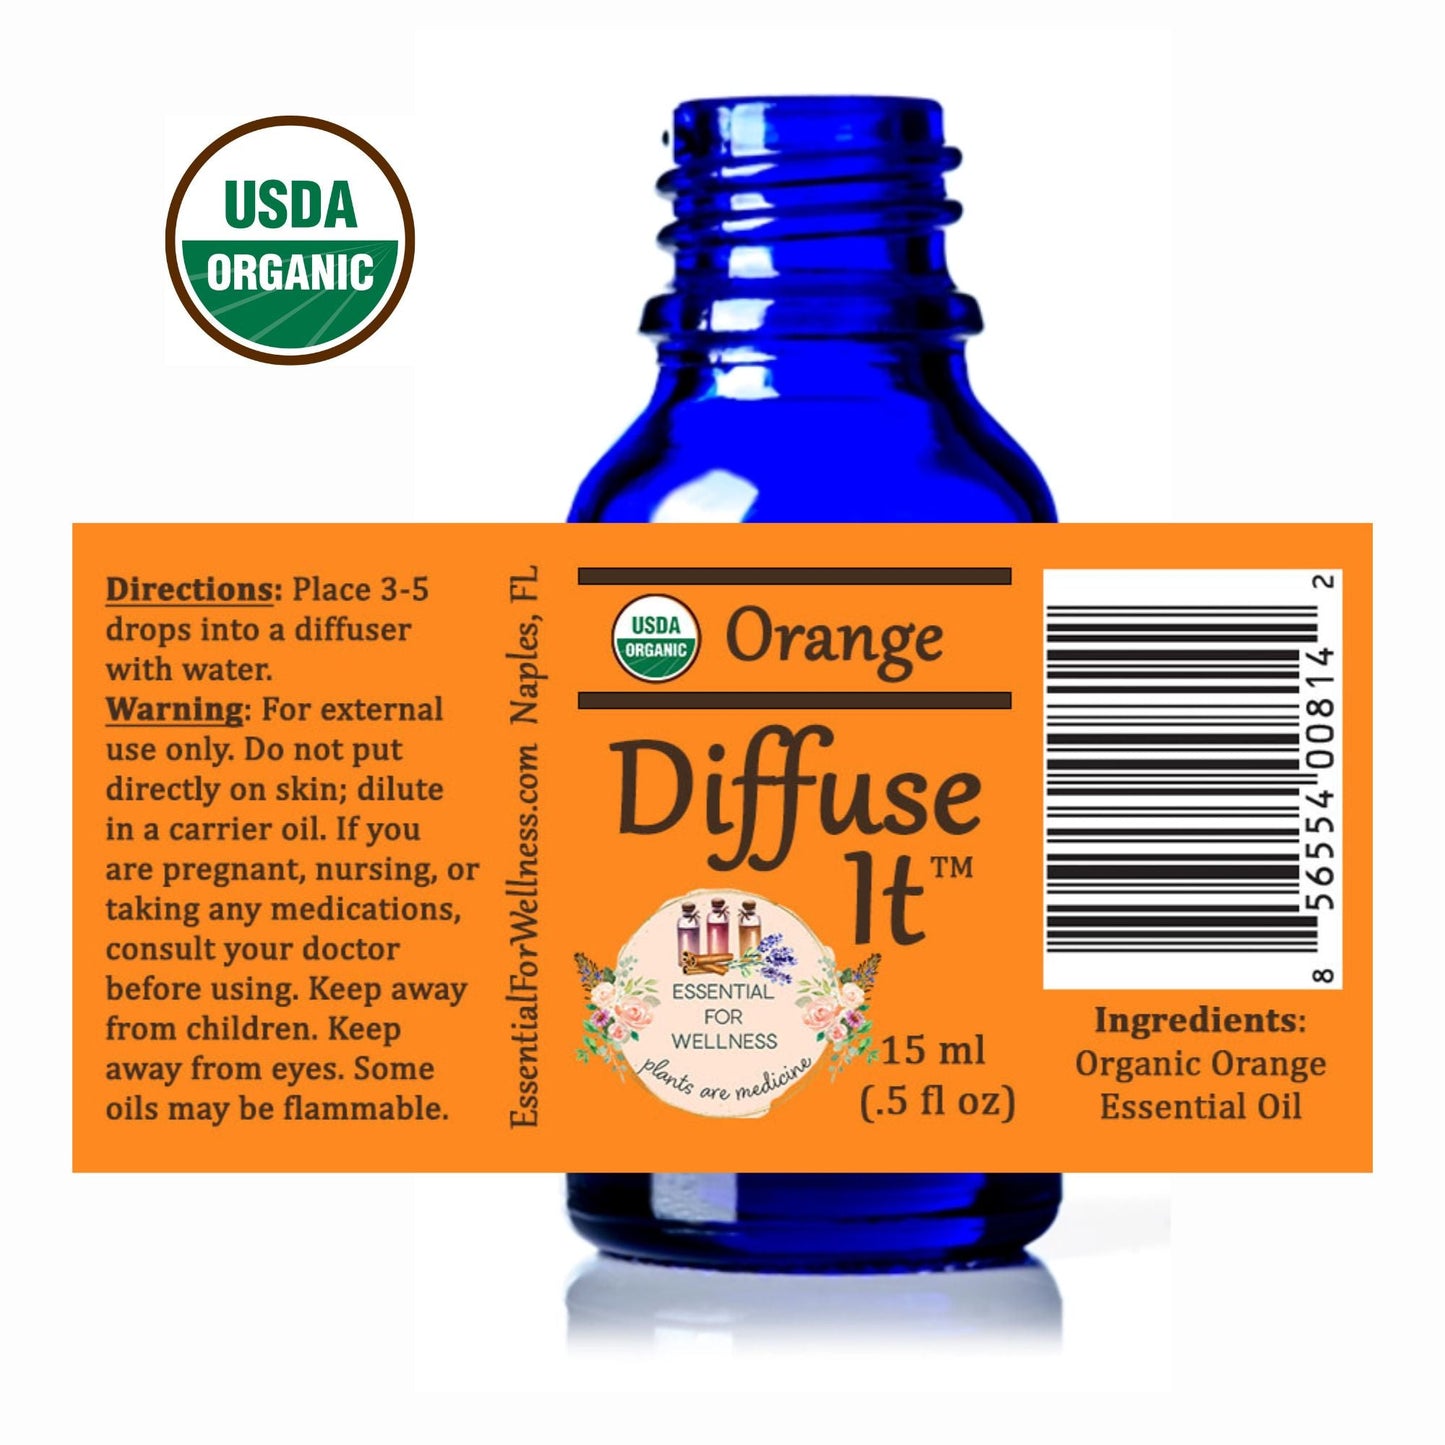 Organic Sweet Orange Essential Oil by Diffuse It™